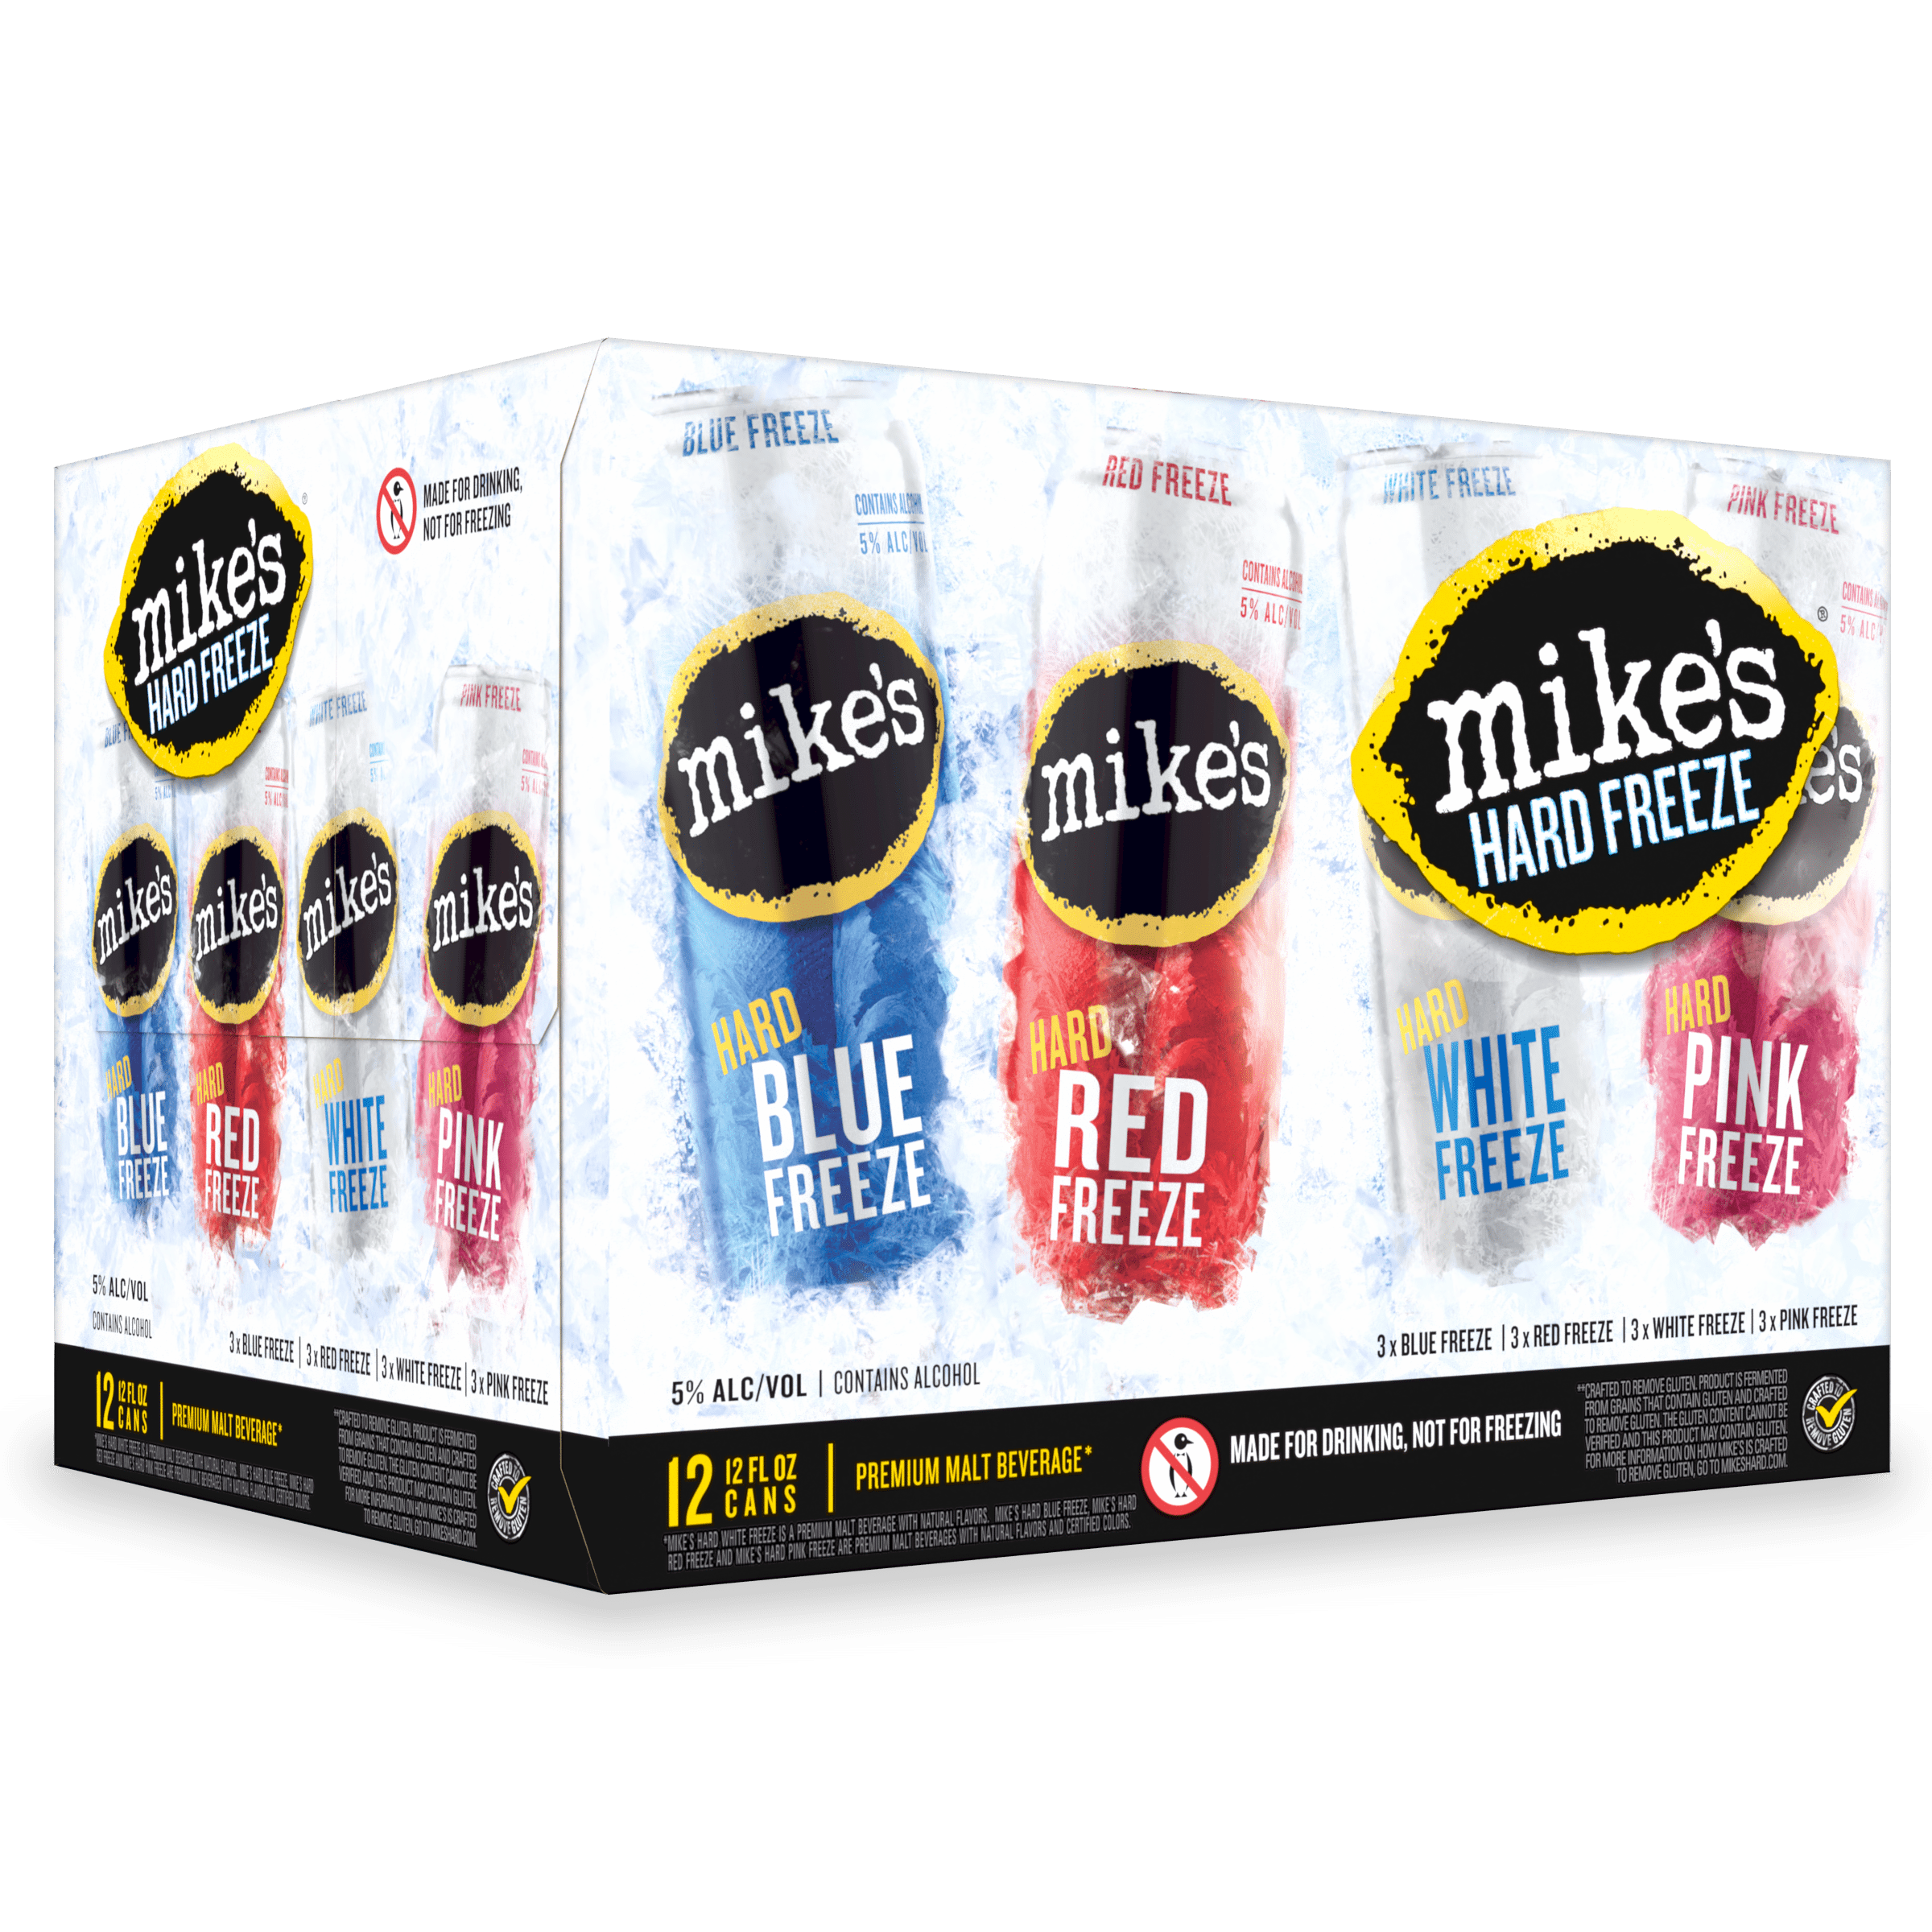 Mike's Hard Freeze, Variety Pack, 12 Pack, 12 fl oz Cans, 5% ABV